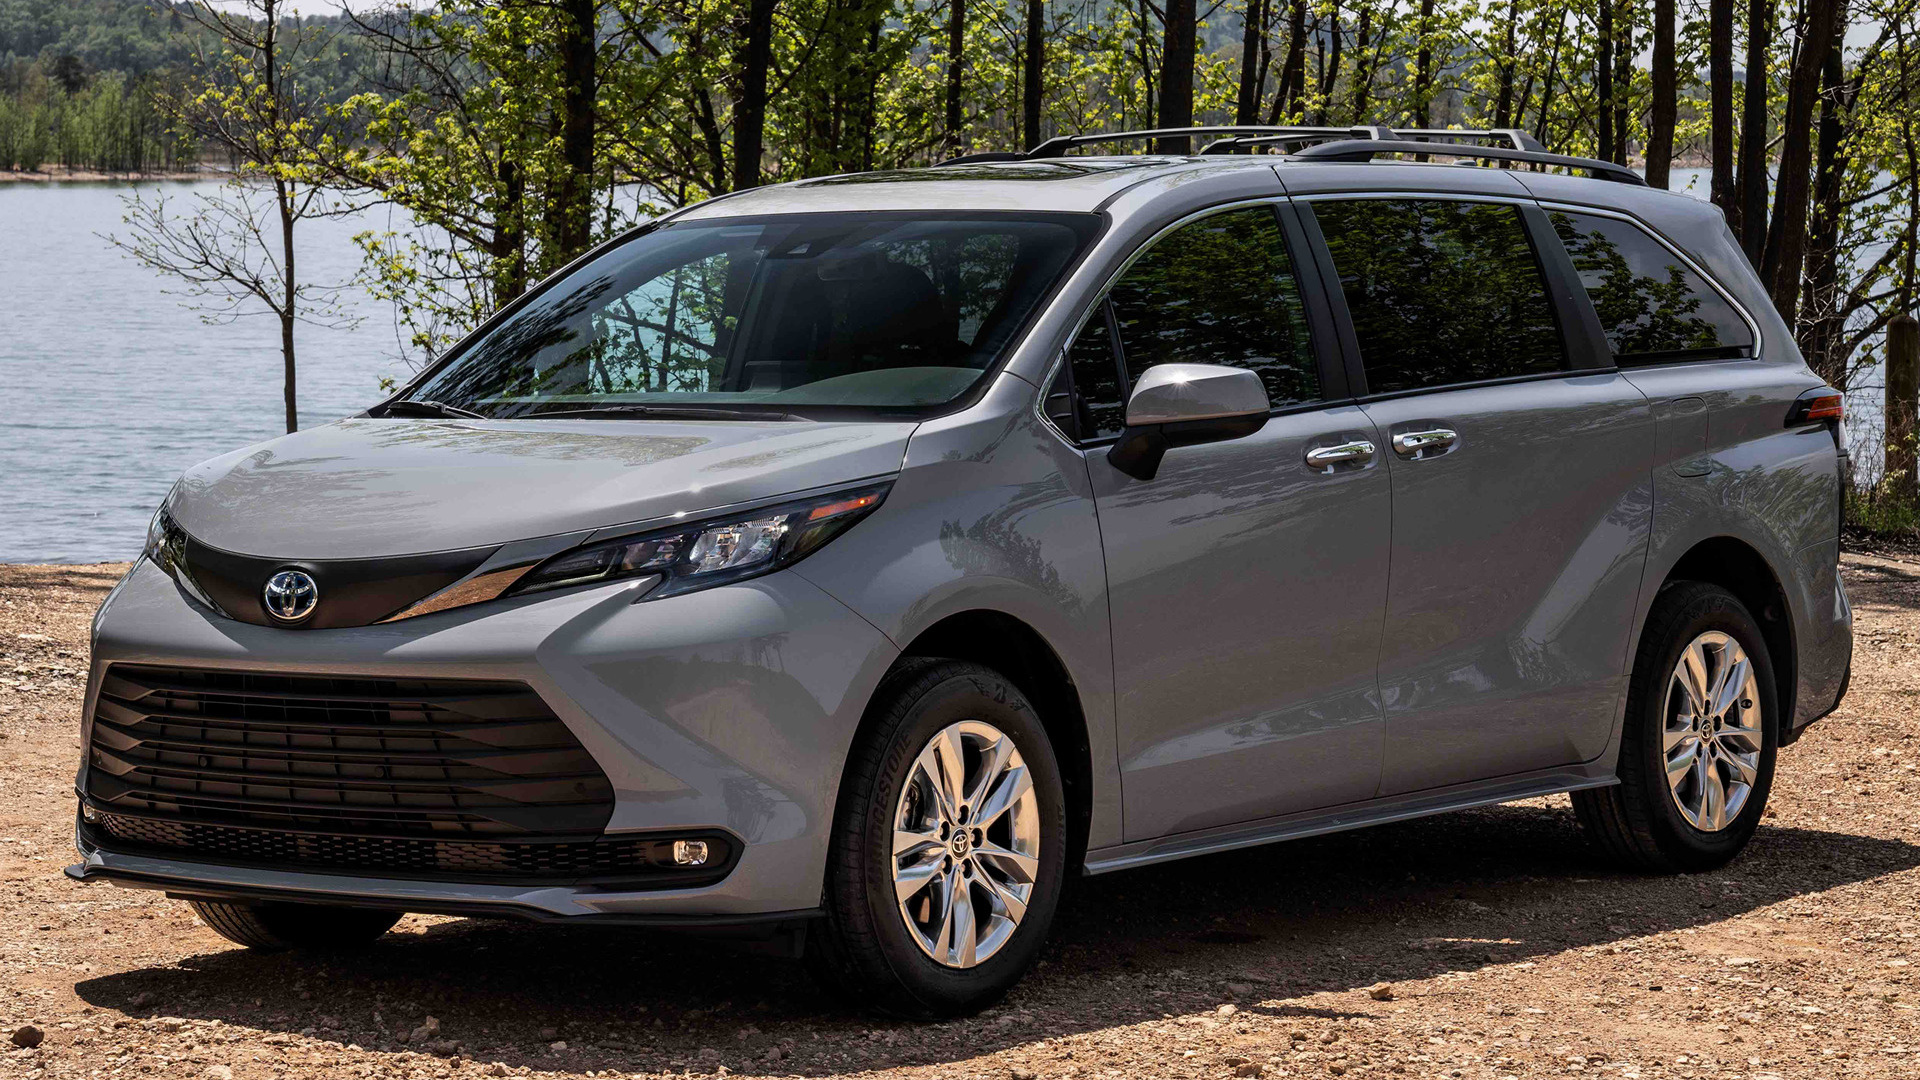 Toyota Sienna, Model year 2022, Beautiful wallpapers, High-quality images, 1920x1080 Full HD Desktop